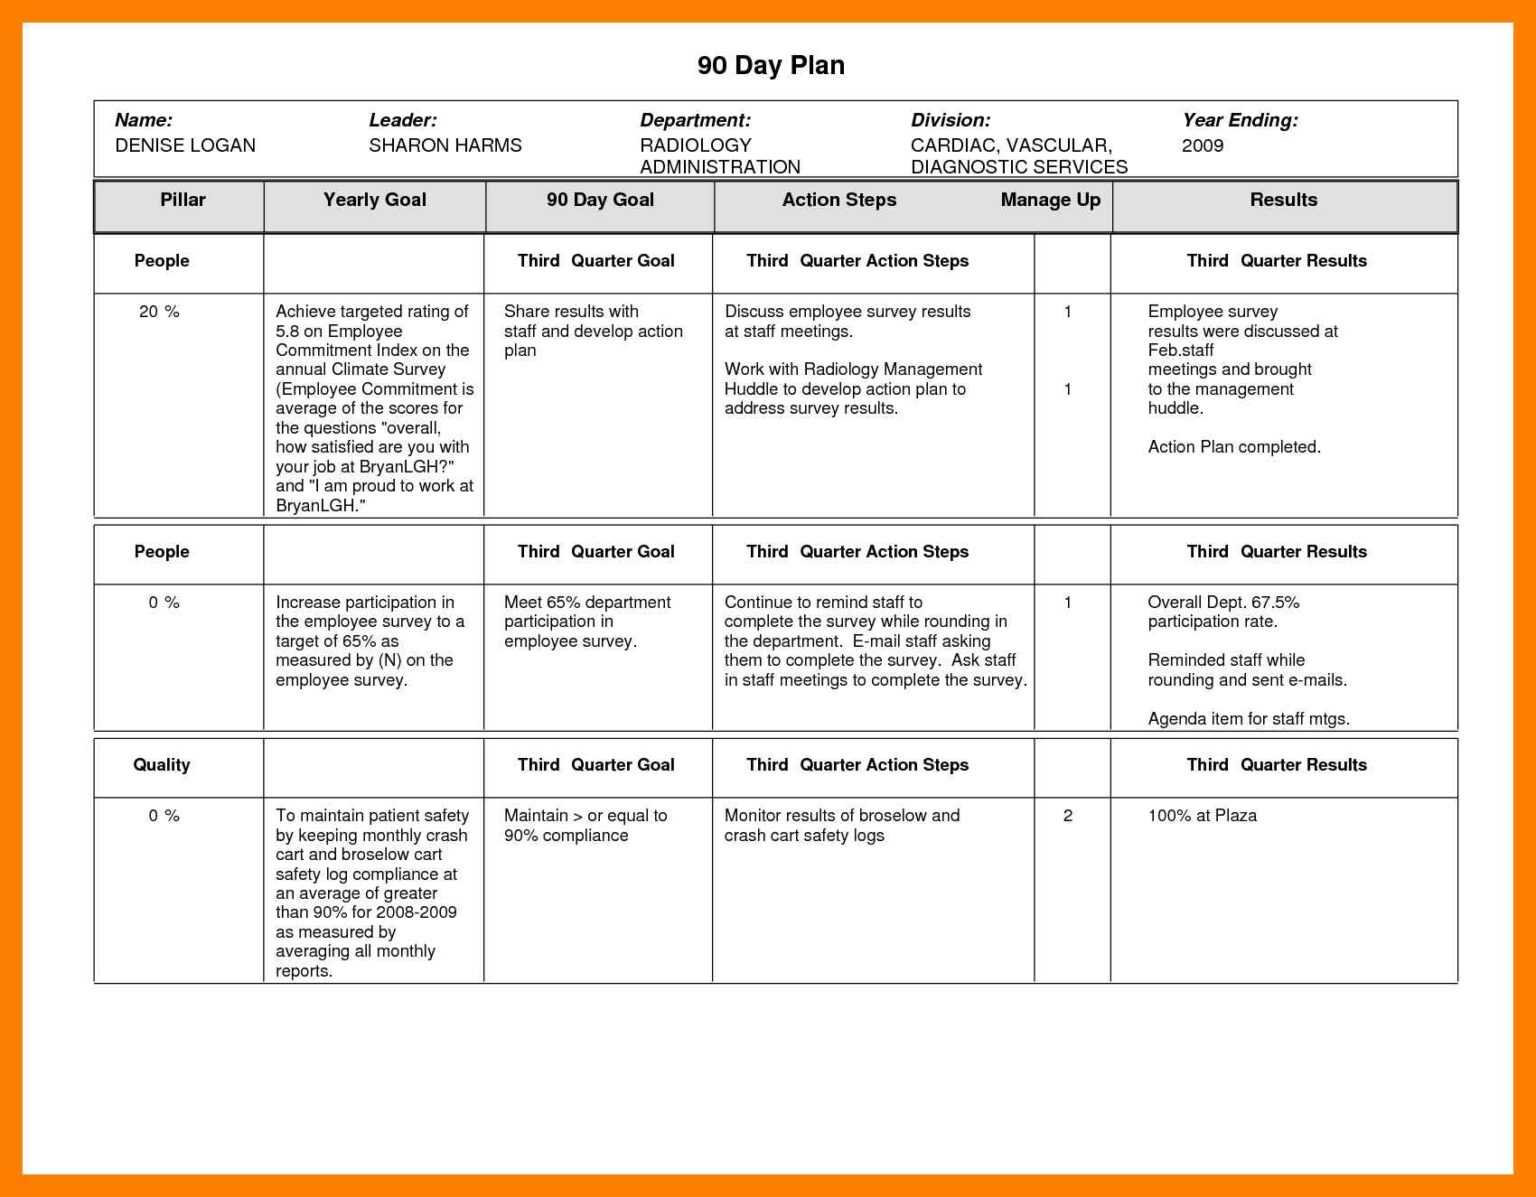 90 day plan template